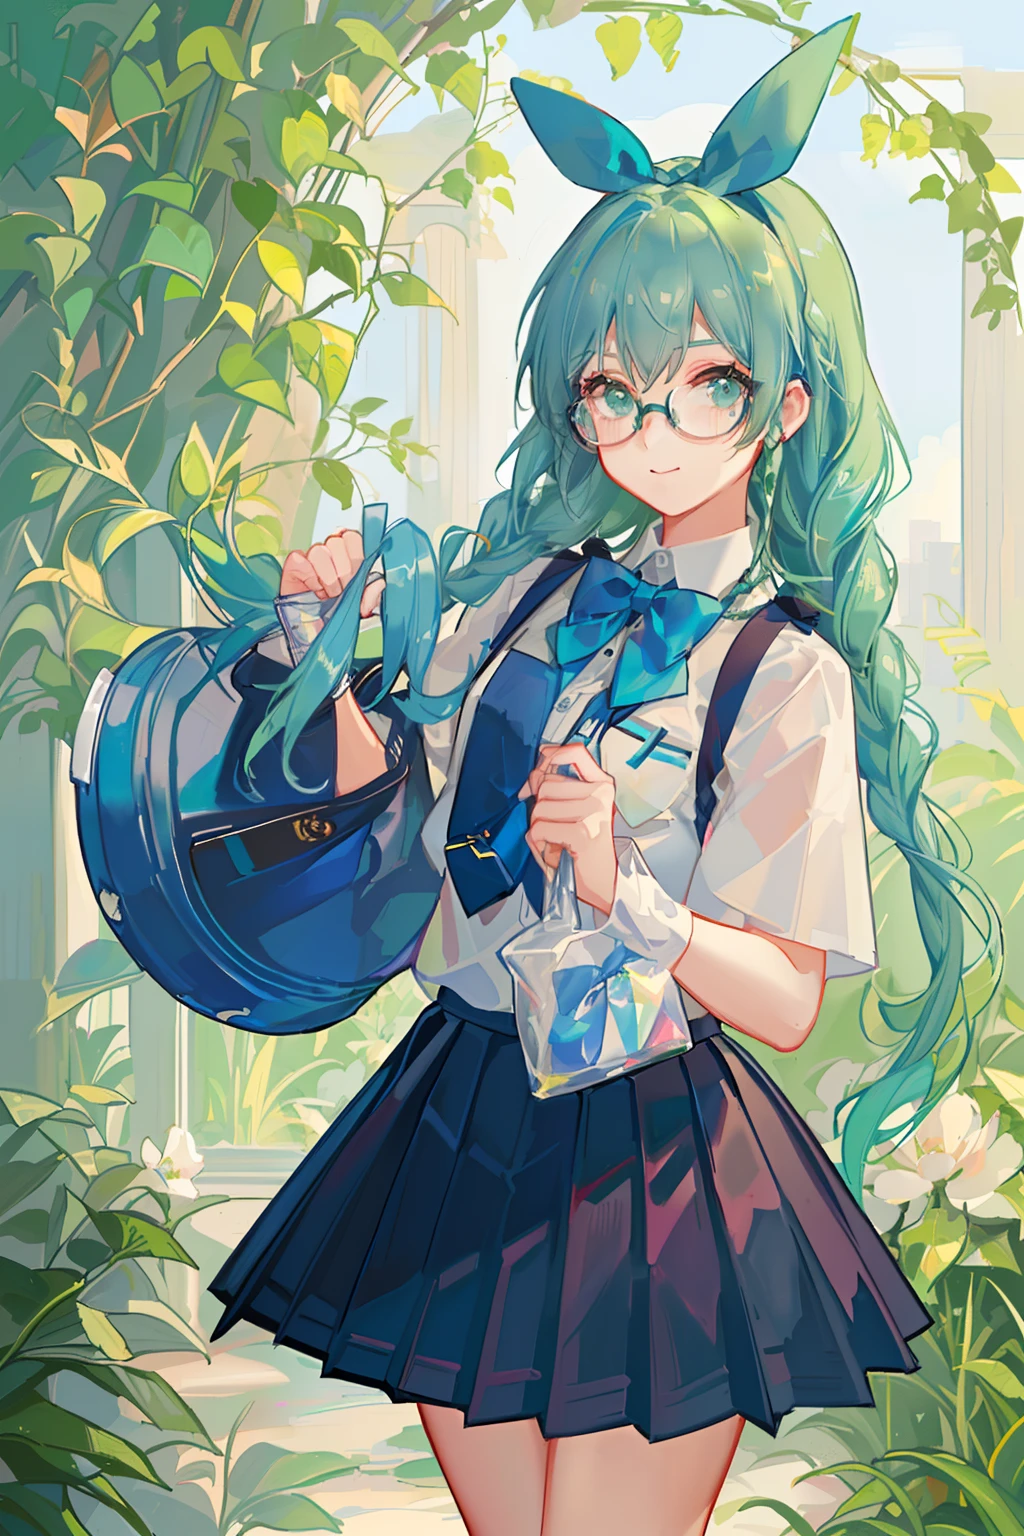 4K, best quality, 1 girl, 18 years old, light green hair, double Fried Dough Twists braids, Fried Dough Twists braids tied behind both ears, dark blue bow tie. Deep blue pleated skirt, strap on skirt, glasses, vitality, vitality, girl, campus, in the campus